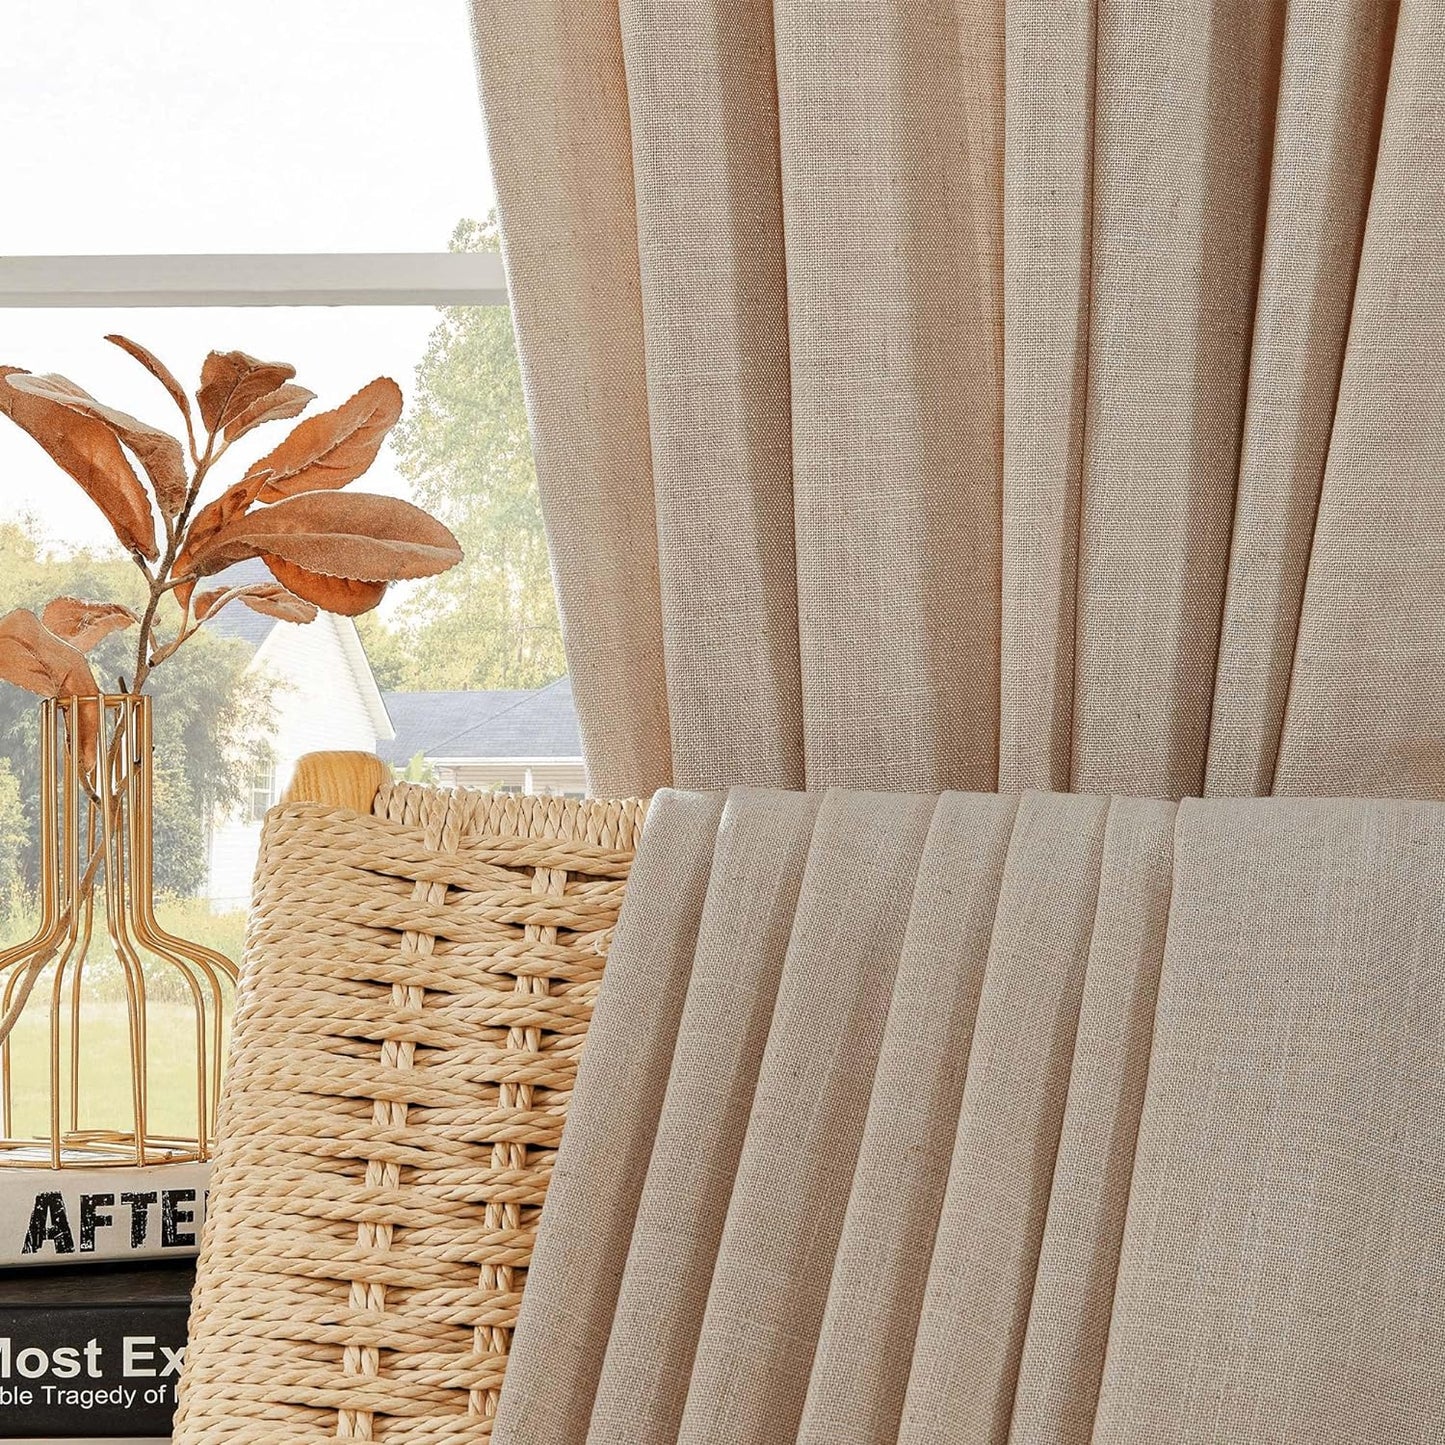 Joydeco Linen Curtains for Living Room,Light Filtering Rod Pocket Back Tab Semi Sheer Drapes Window Long Curtains 90 Inches Long Sheer Bliss  Joydeco   